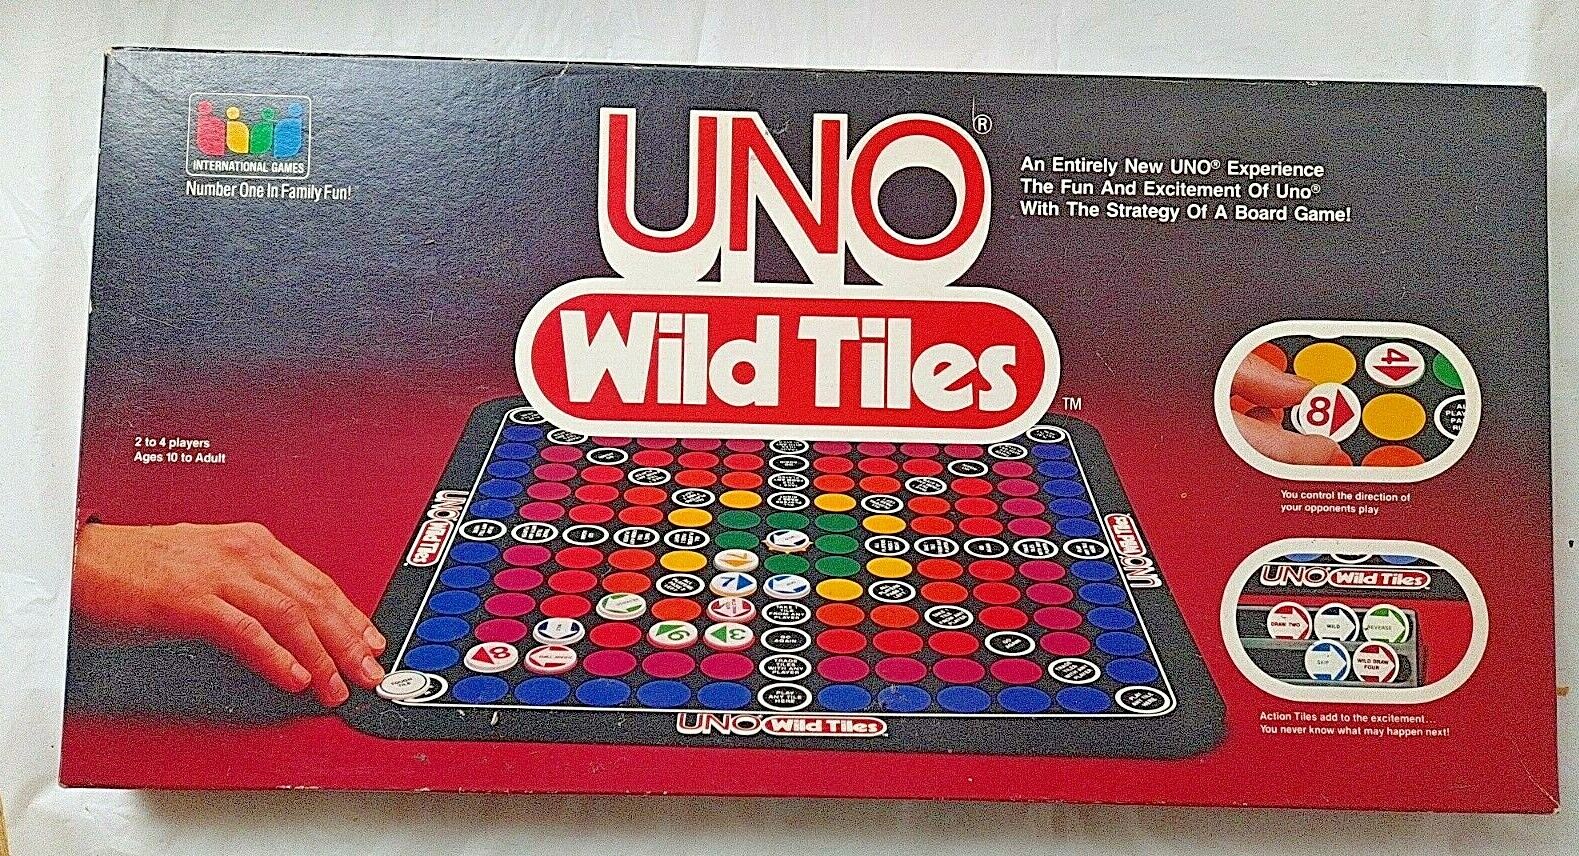 1983-uno-wild-tiles-1st-edition-board-game-by-international-clean-100